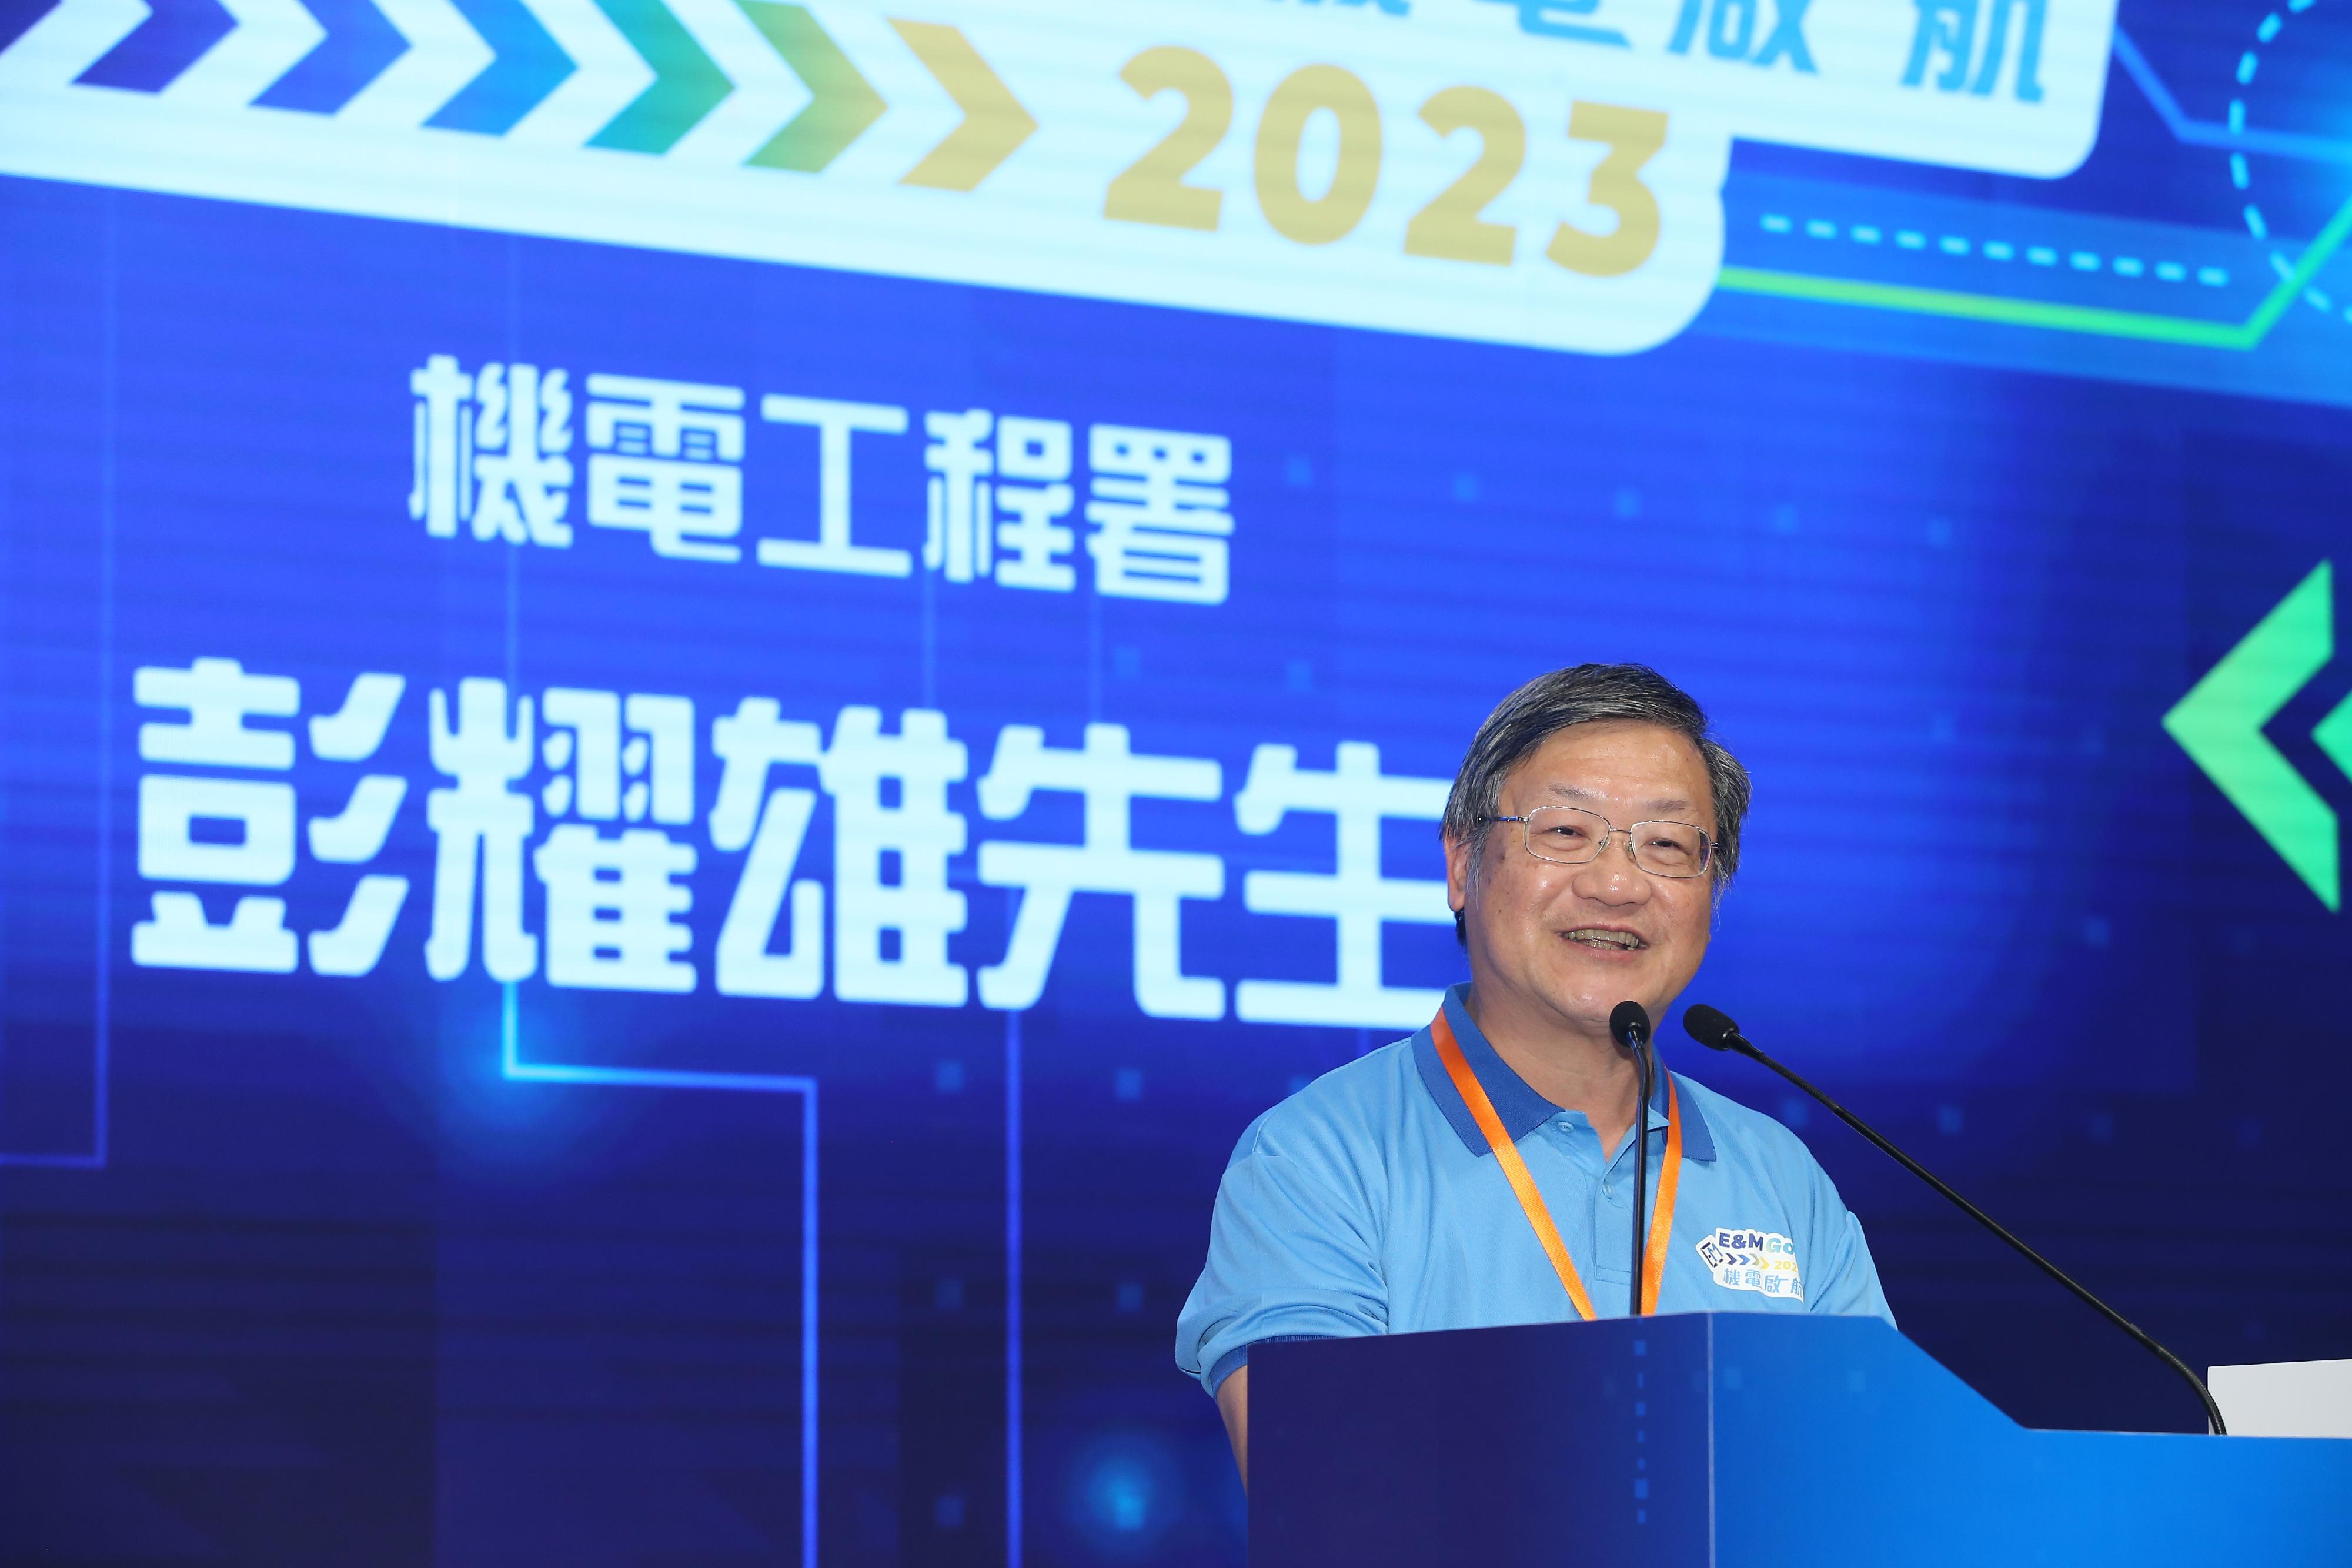 The Hong Kong Electrical and Mechanical Trade Promotion Working Group today (September 26) held the "E&M GO!" orientation ceremony 2023. Photo shows the Director of Electrical and Mechanical Services, Mr Eric Pang, speaking at the ceremony.